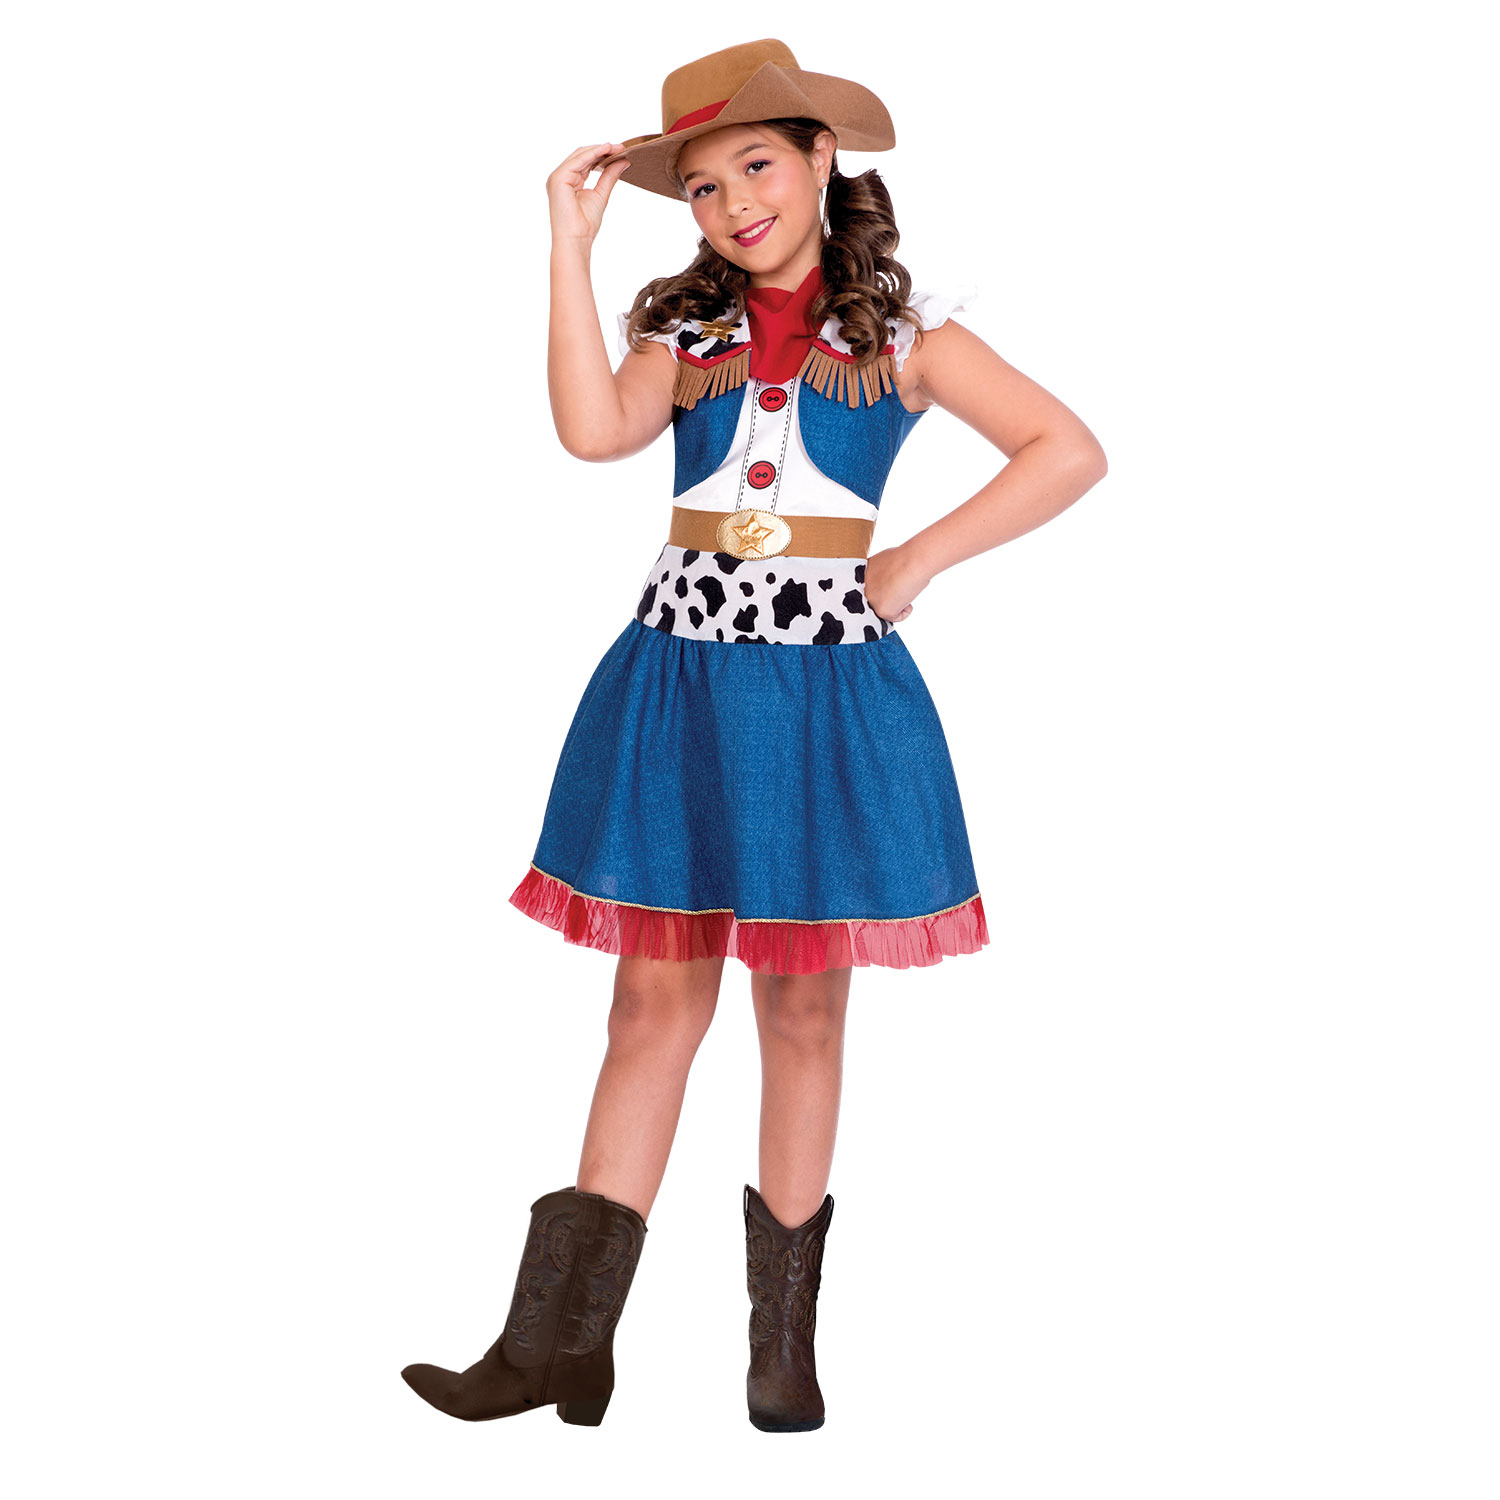 Cowgirl Cutie Costume - Age 6-8 Years - 1 PC : Amscan International